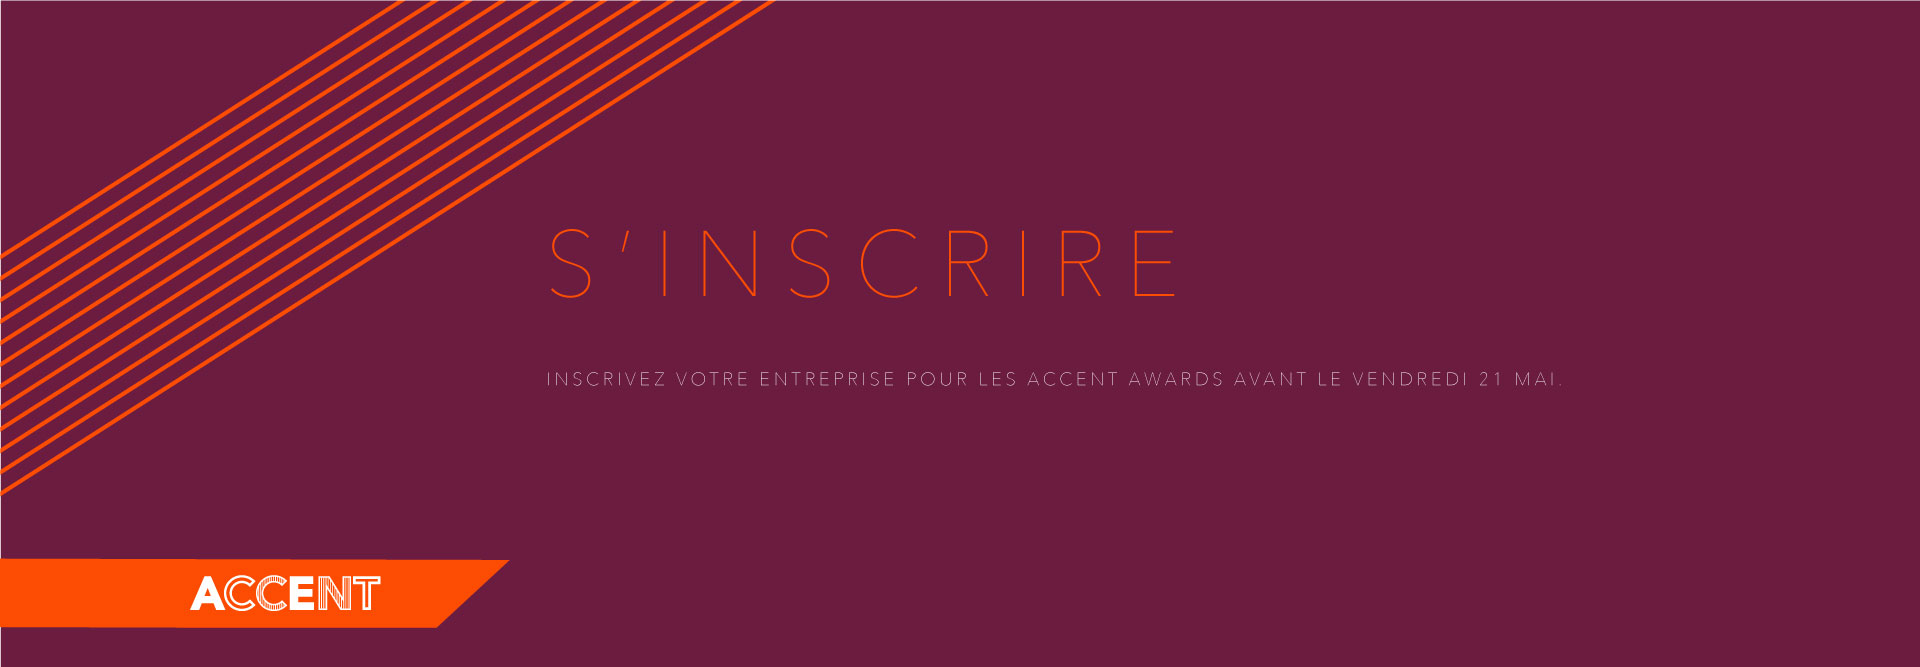 Accent Awards S'inscrire